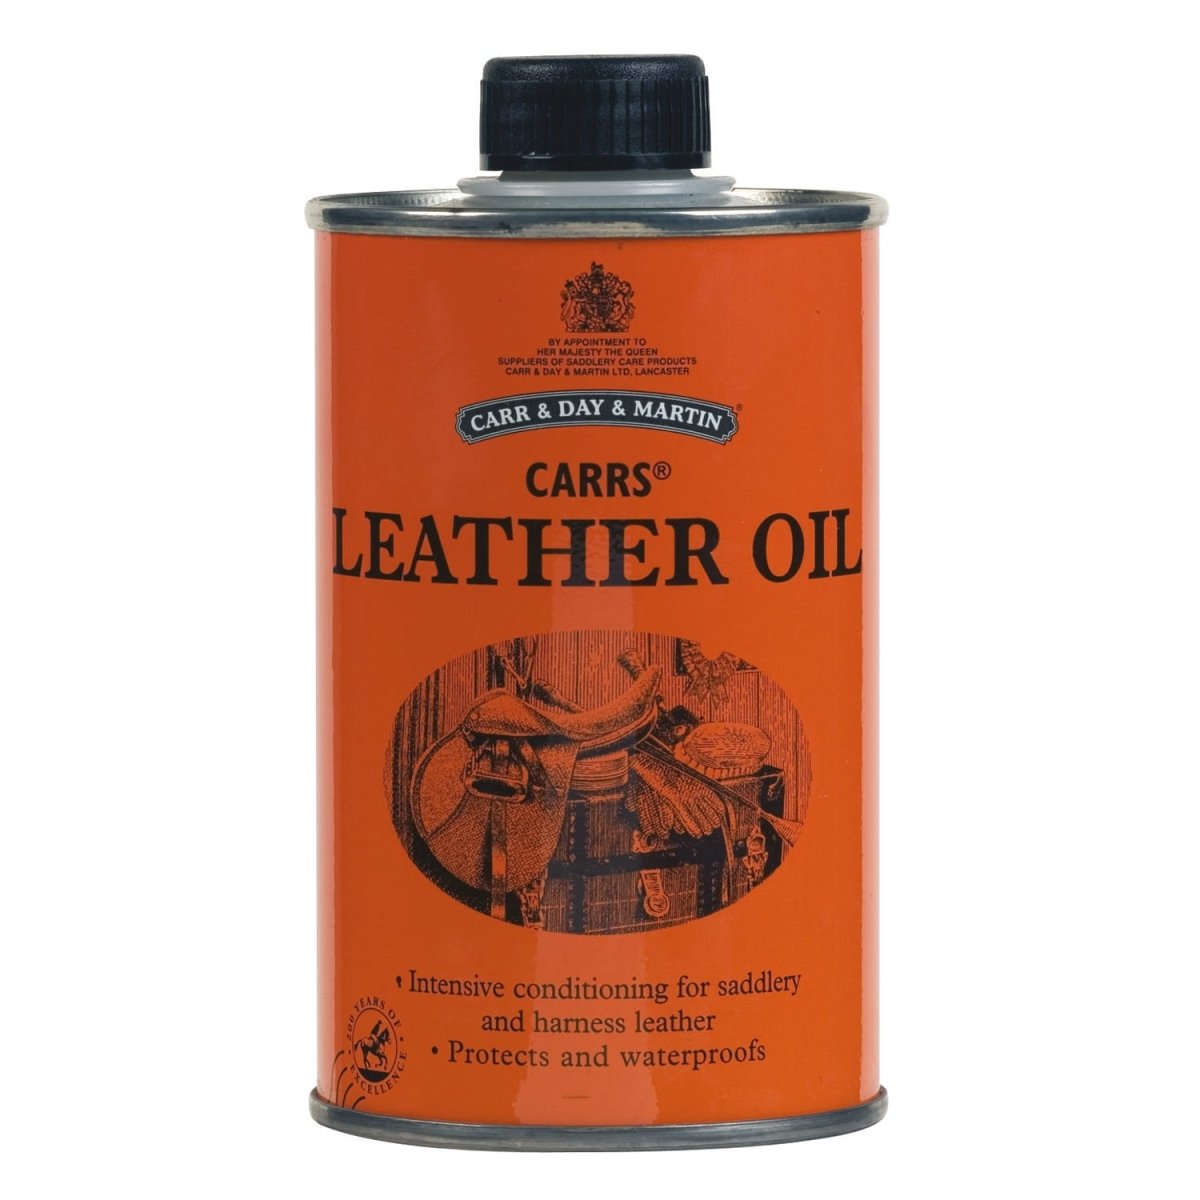 Carr & Day & Martin Carrs Leather Oil - 300Ml -